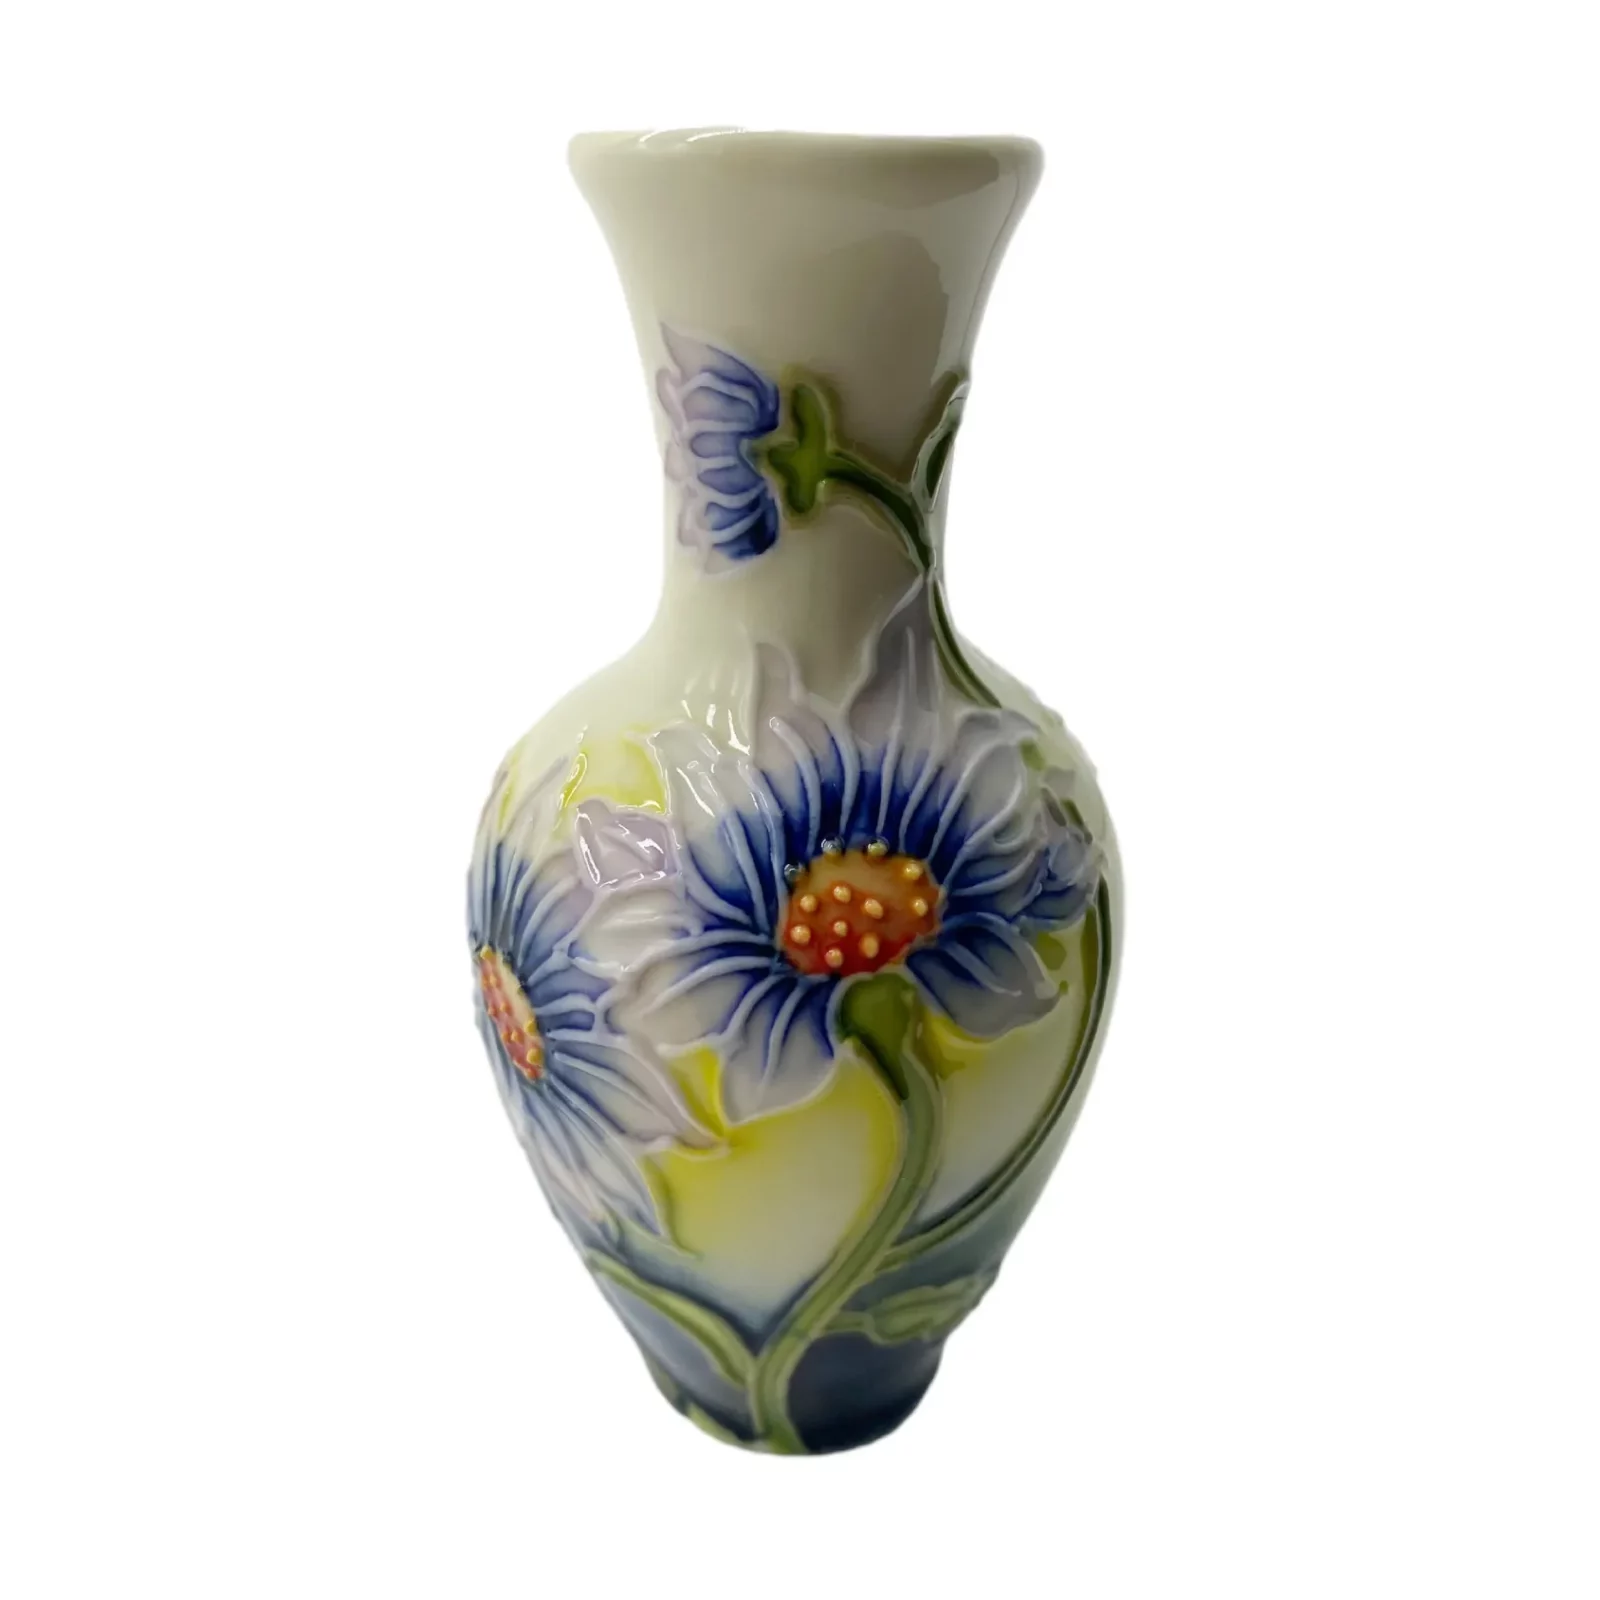 small vase by old tupton ware